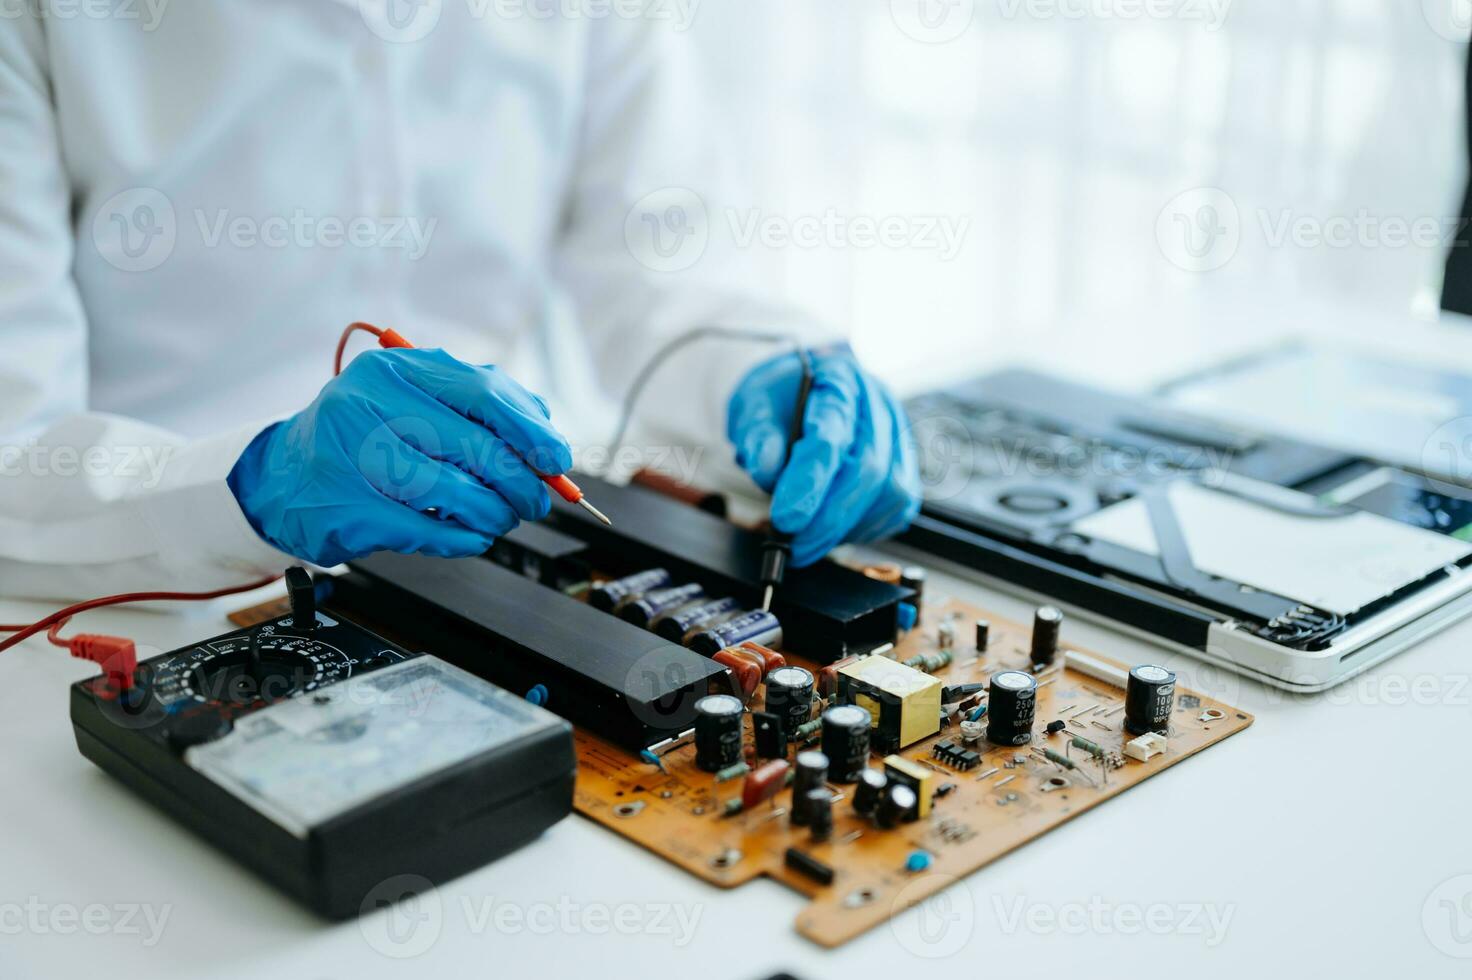 Electronics technician, electronic engineering electronic repair,electronics measuring and testing, repair and maintenance concepts.uses a voltage meter to check and upgrade photo